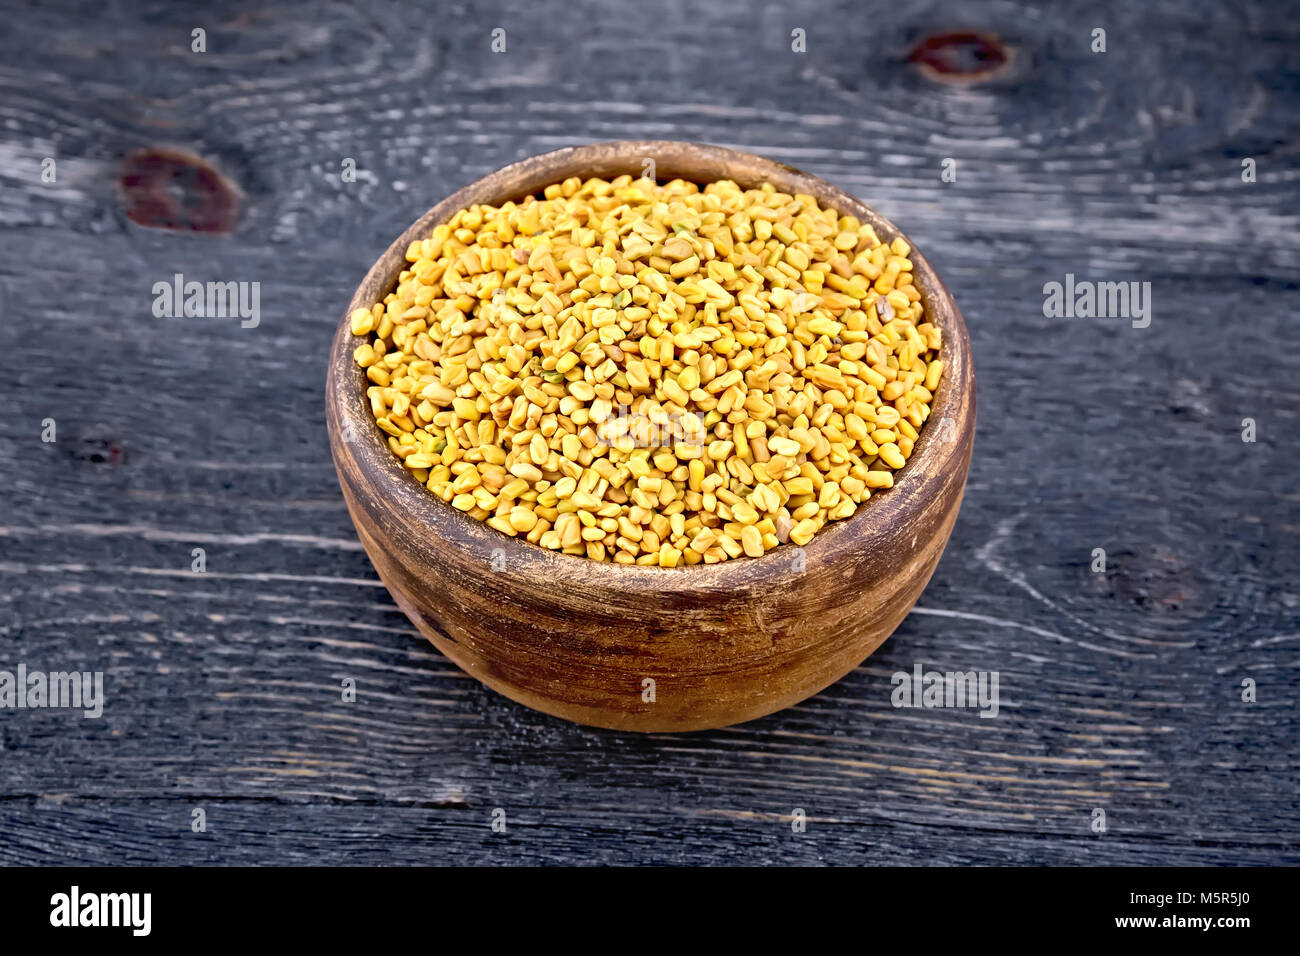 Fenugreek seeds in a clay bowl on the background of a wooden board Stock Photo